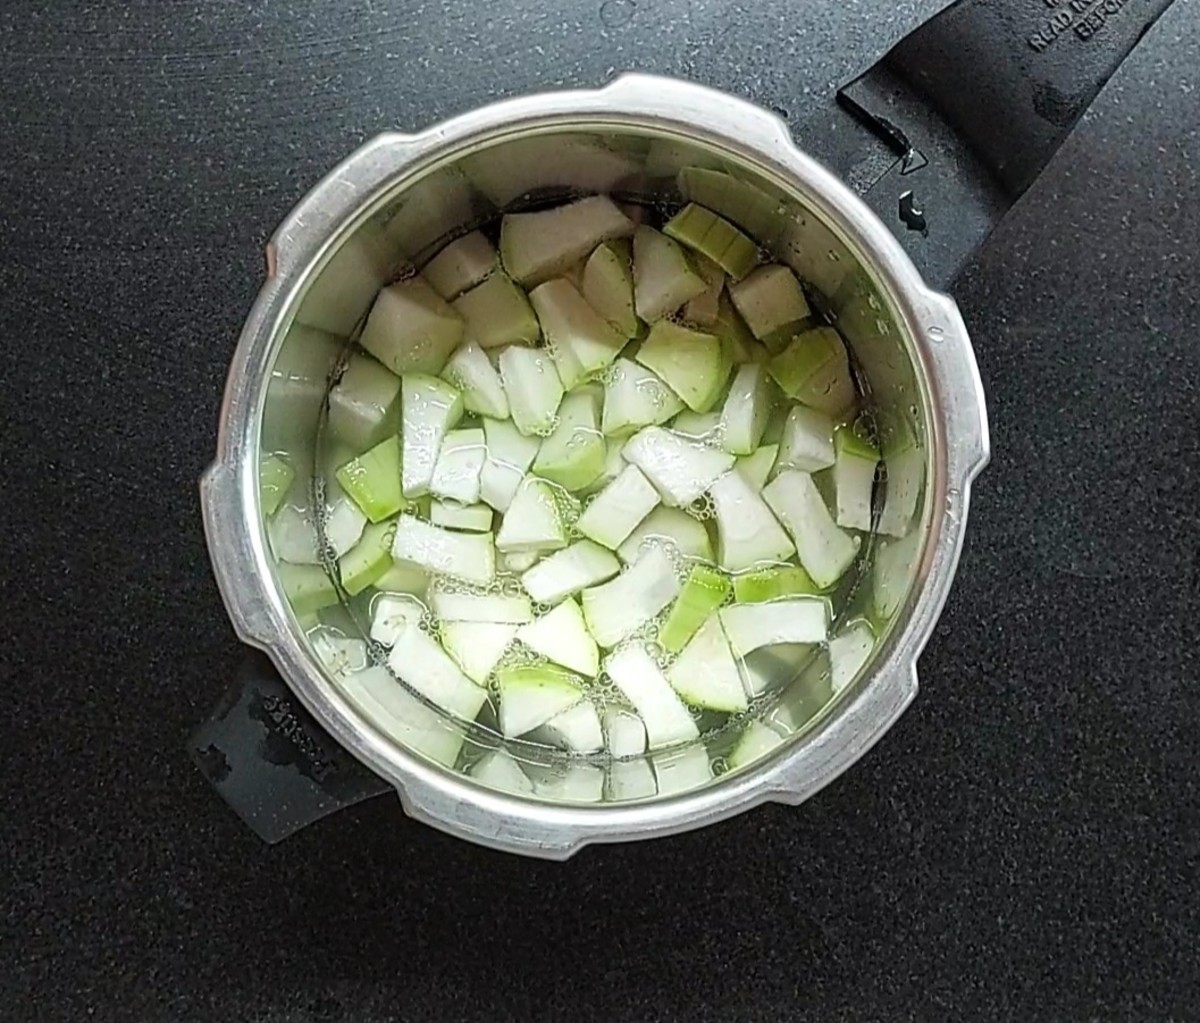 After soaking, discard water and transfer to the cooker. Add 1 cup peeled and chopped bottle gourd, 1 cup of water, salt, close the lid and cook for 3 whistles.